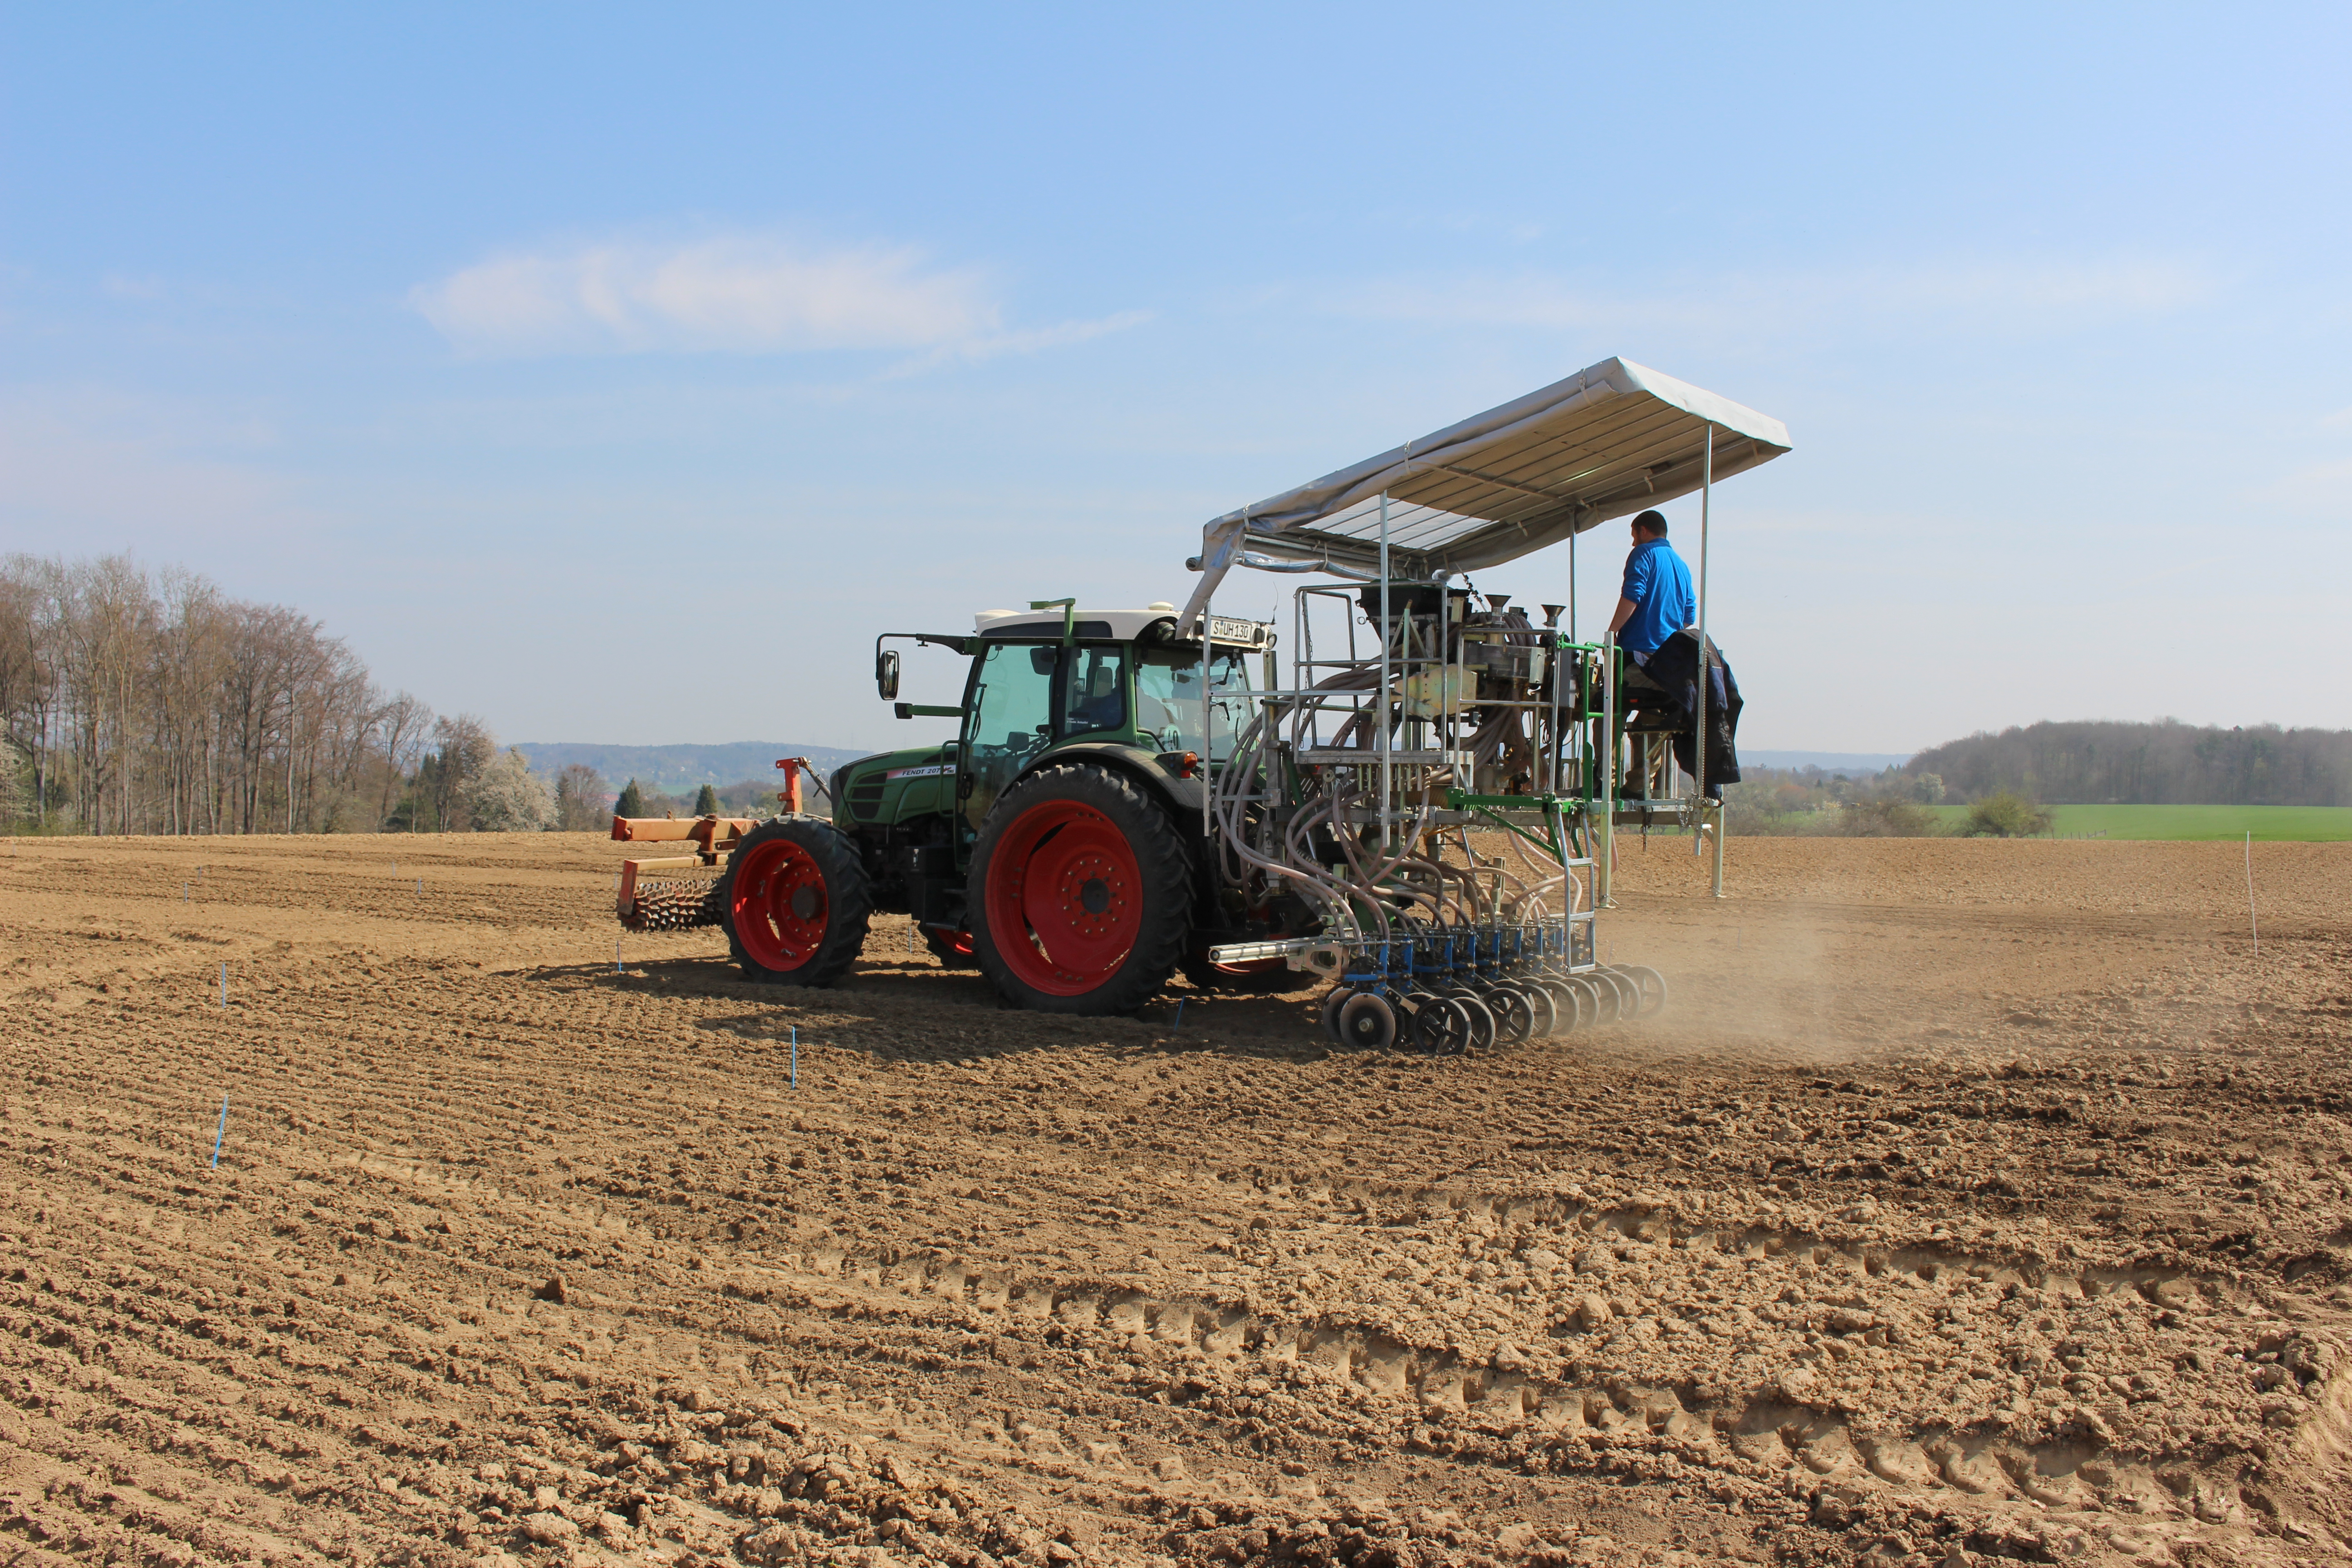 The photo shows a seeder on a field.